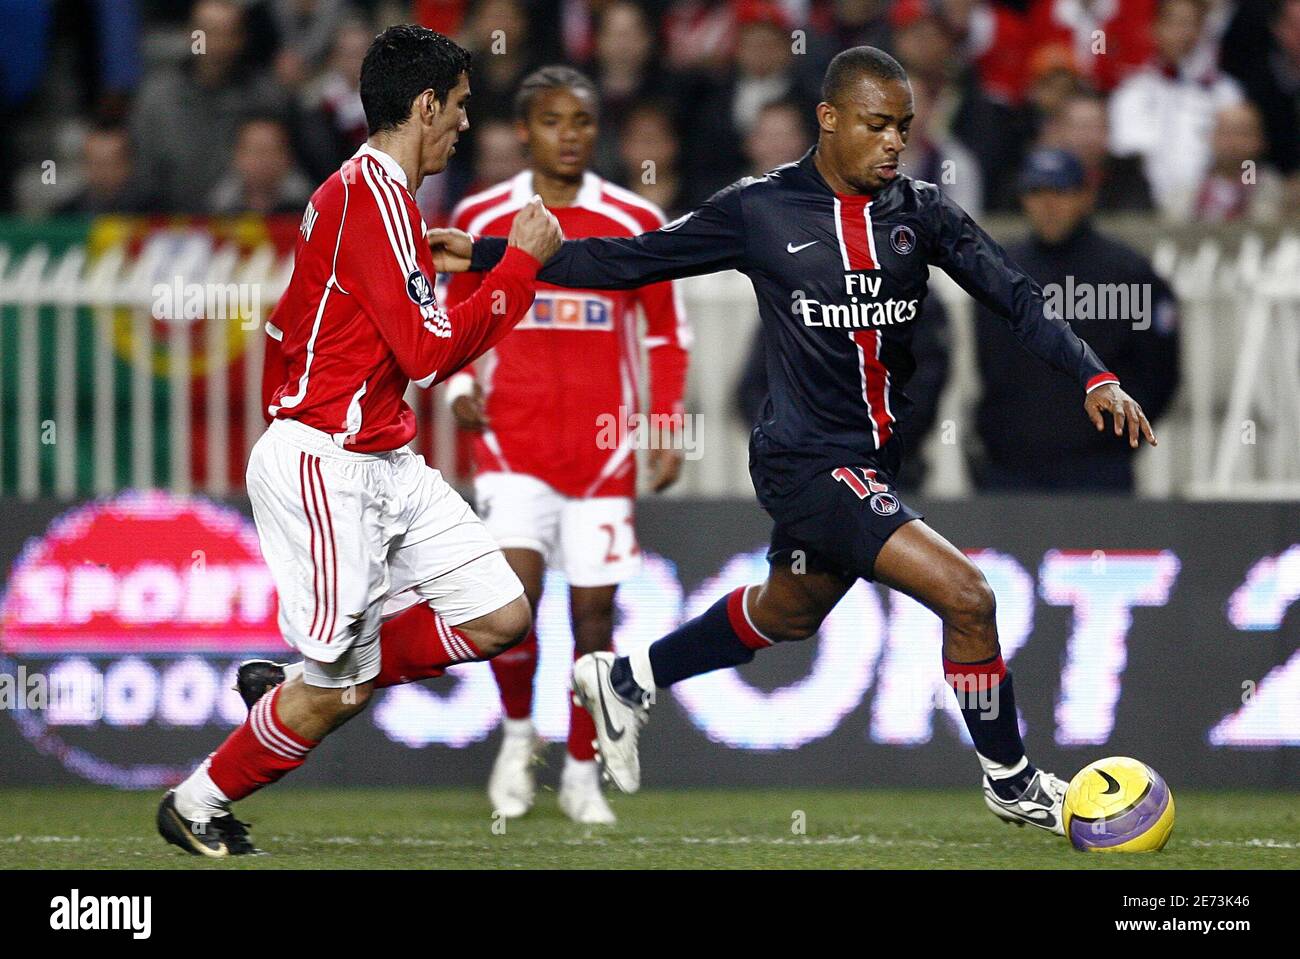 Psg's Bonaventure Kalou during the UEFA Cup second knockout round first leg game soccer match PSG vs Benfica, at the Parc des Princes stadium in Paris, France, on March 8, 2007. PSG won 2-1. Photo by Christian Liewig/ABACAPRESS.COM Stock Photo